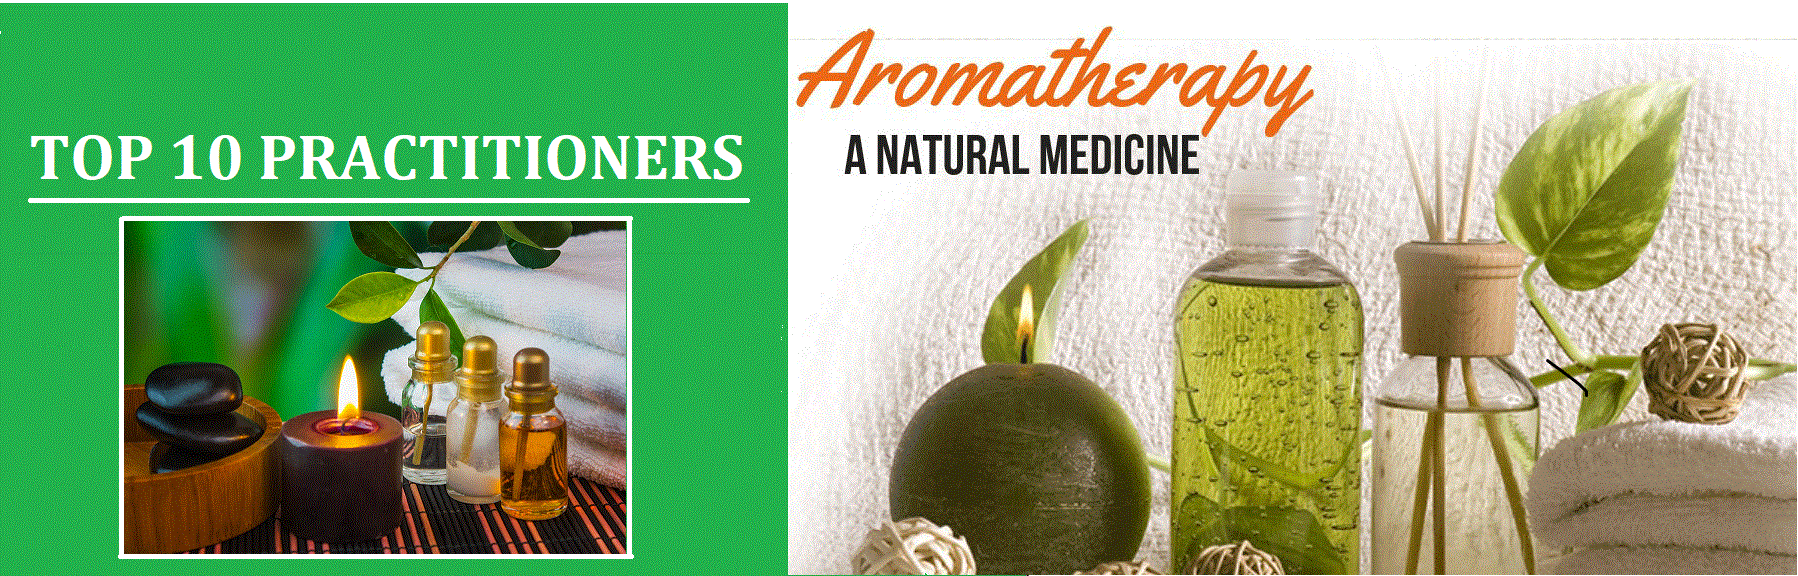 Aromatherapy-Top-10-Practitioners- In-Canada